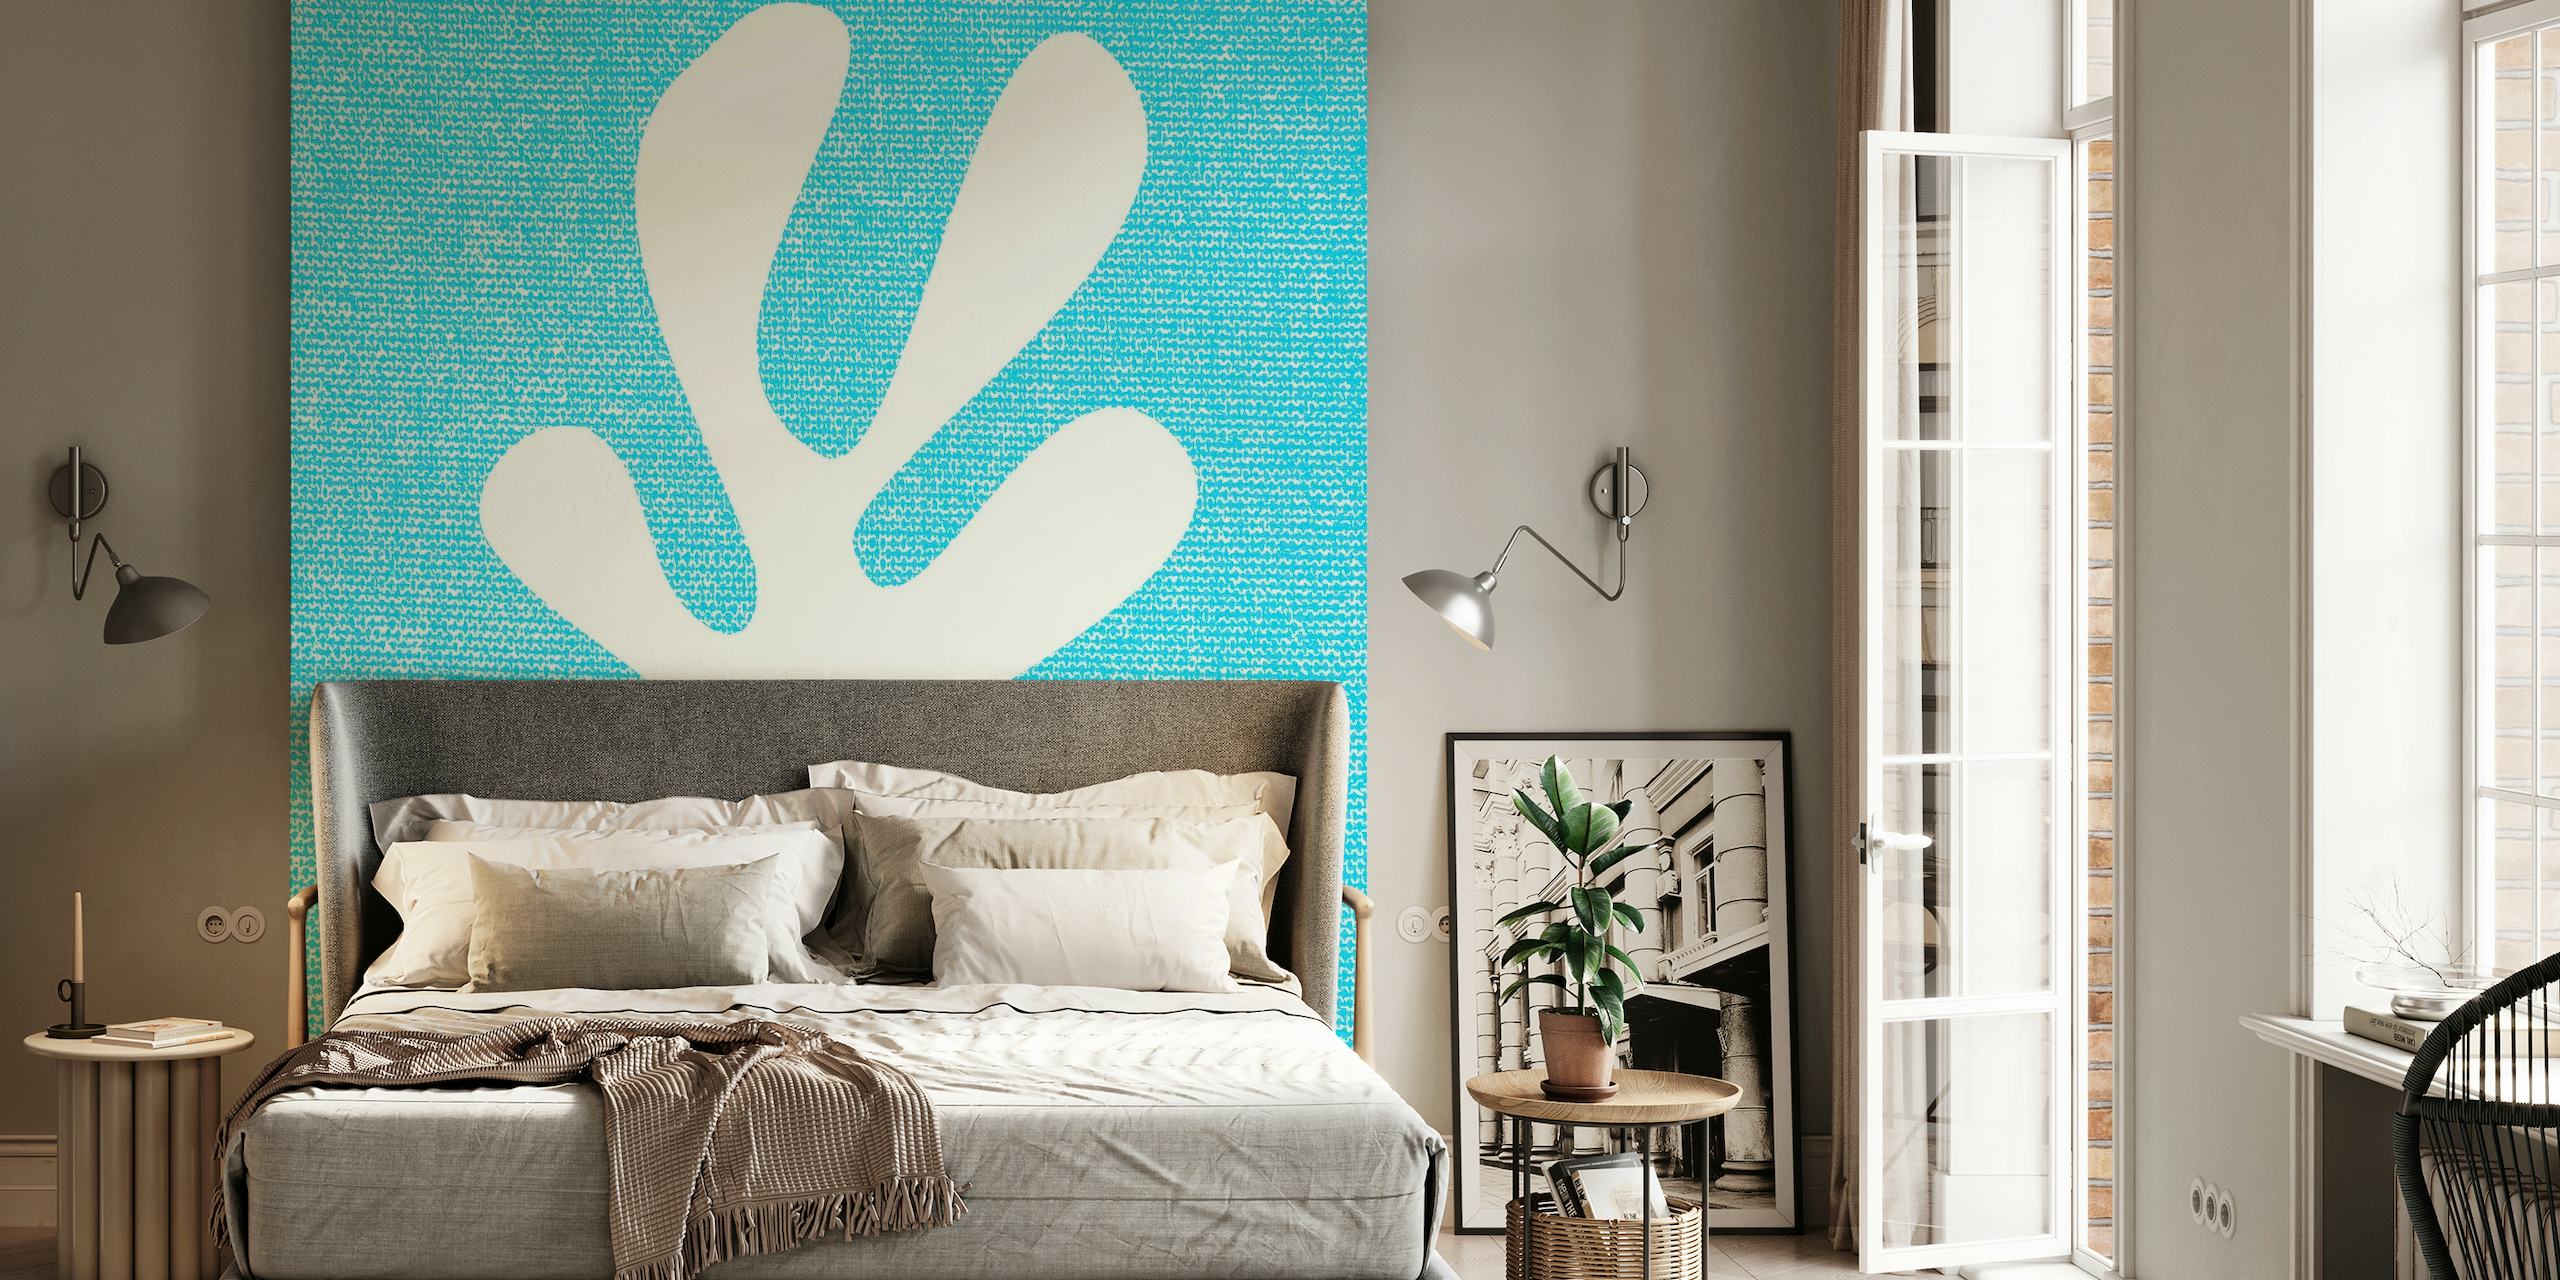 Matisse inspired leaf pattern on a textured blue fabric background wall mural